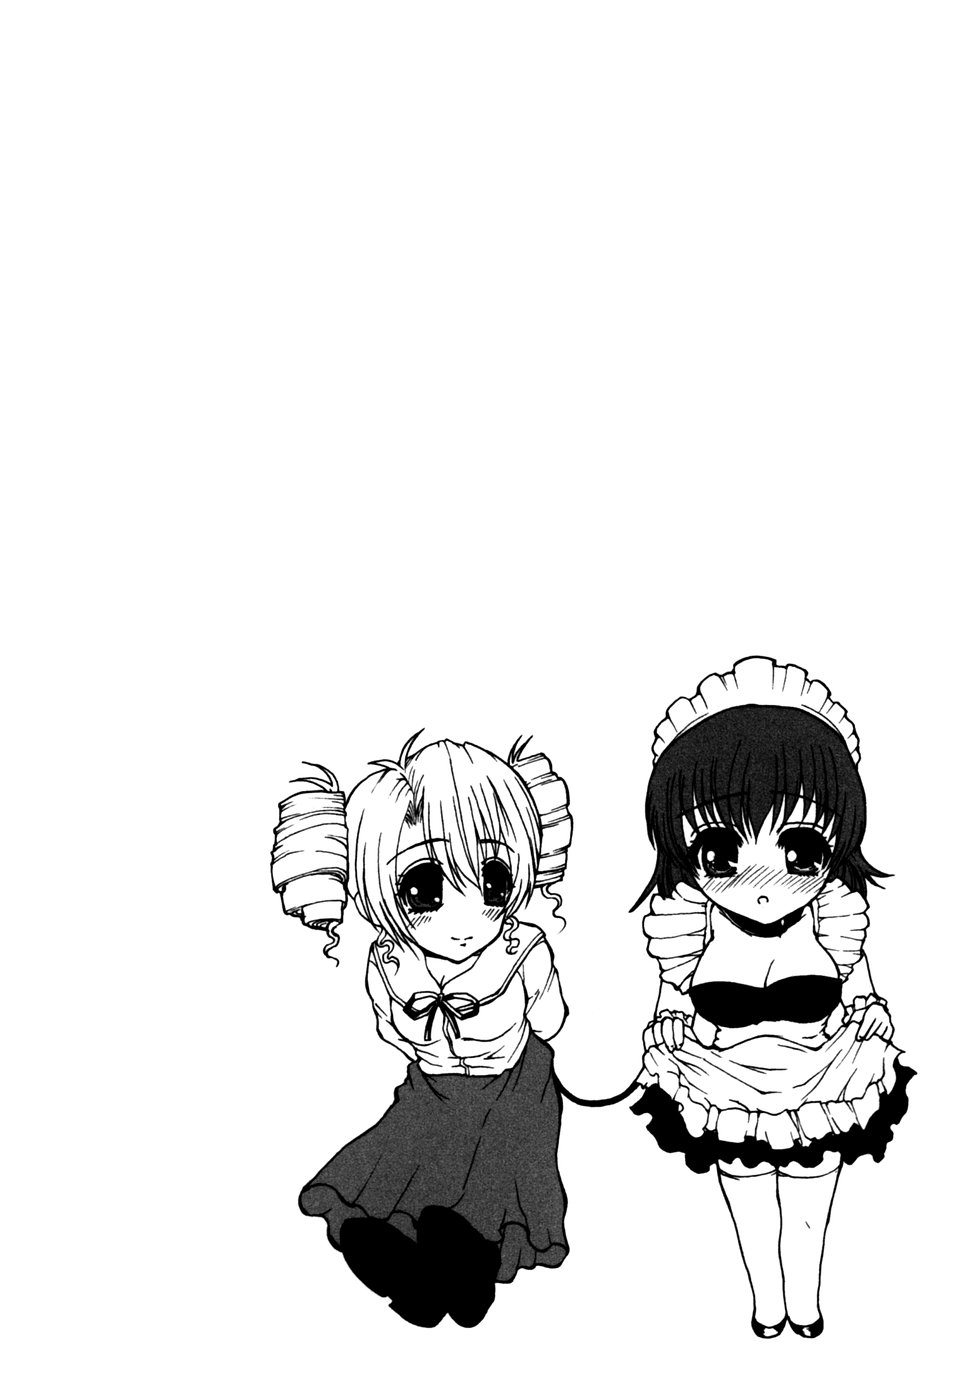 [Neko to Hato] Made by Maid [ねことはと] Made by Maid